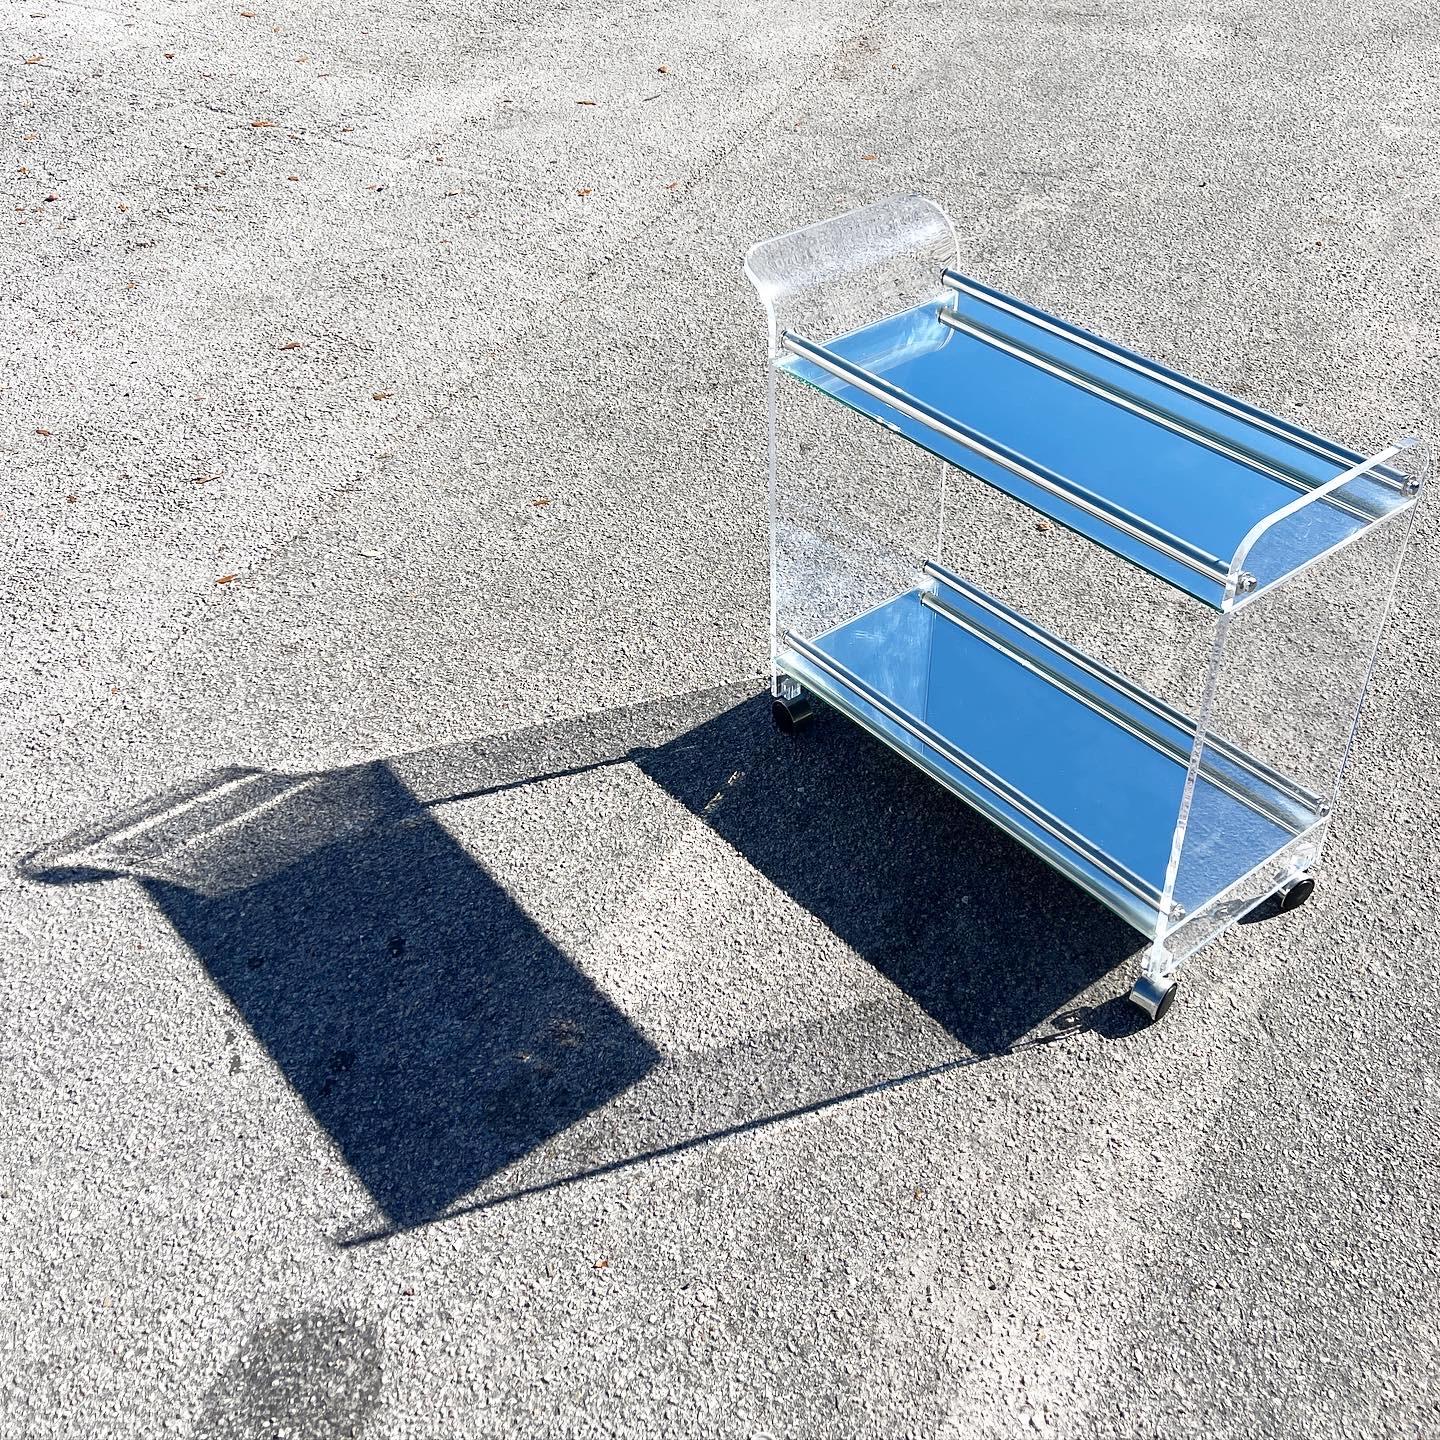 Stunning lucite bar cart. Features two mirrored shelves with tubular lucite arms.